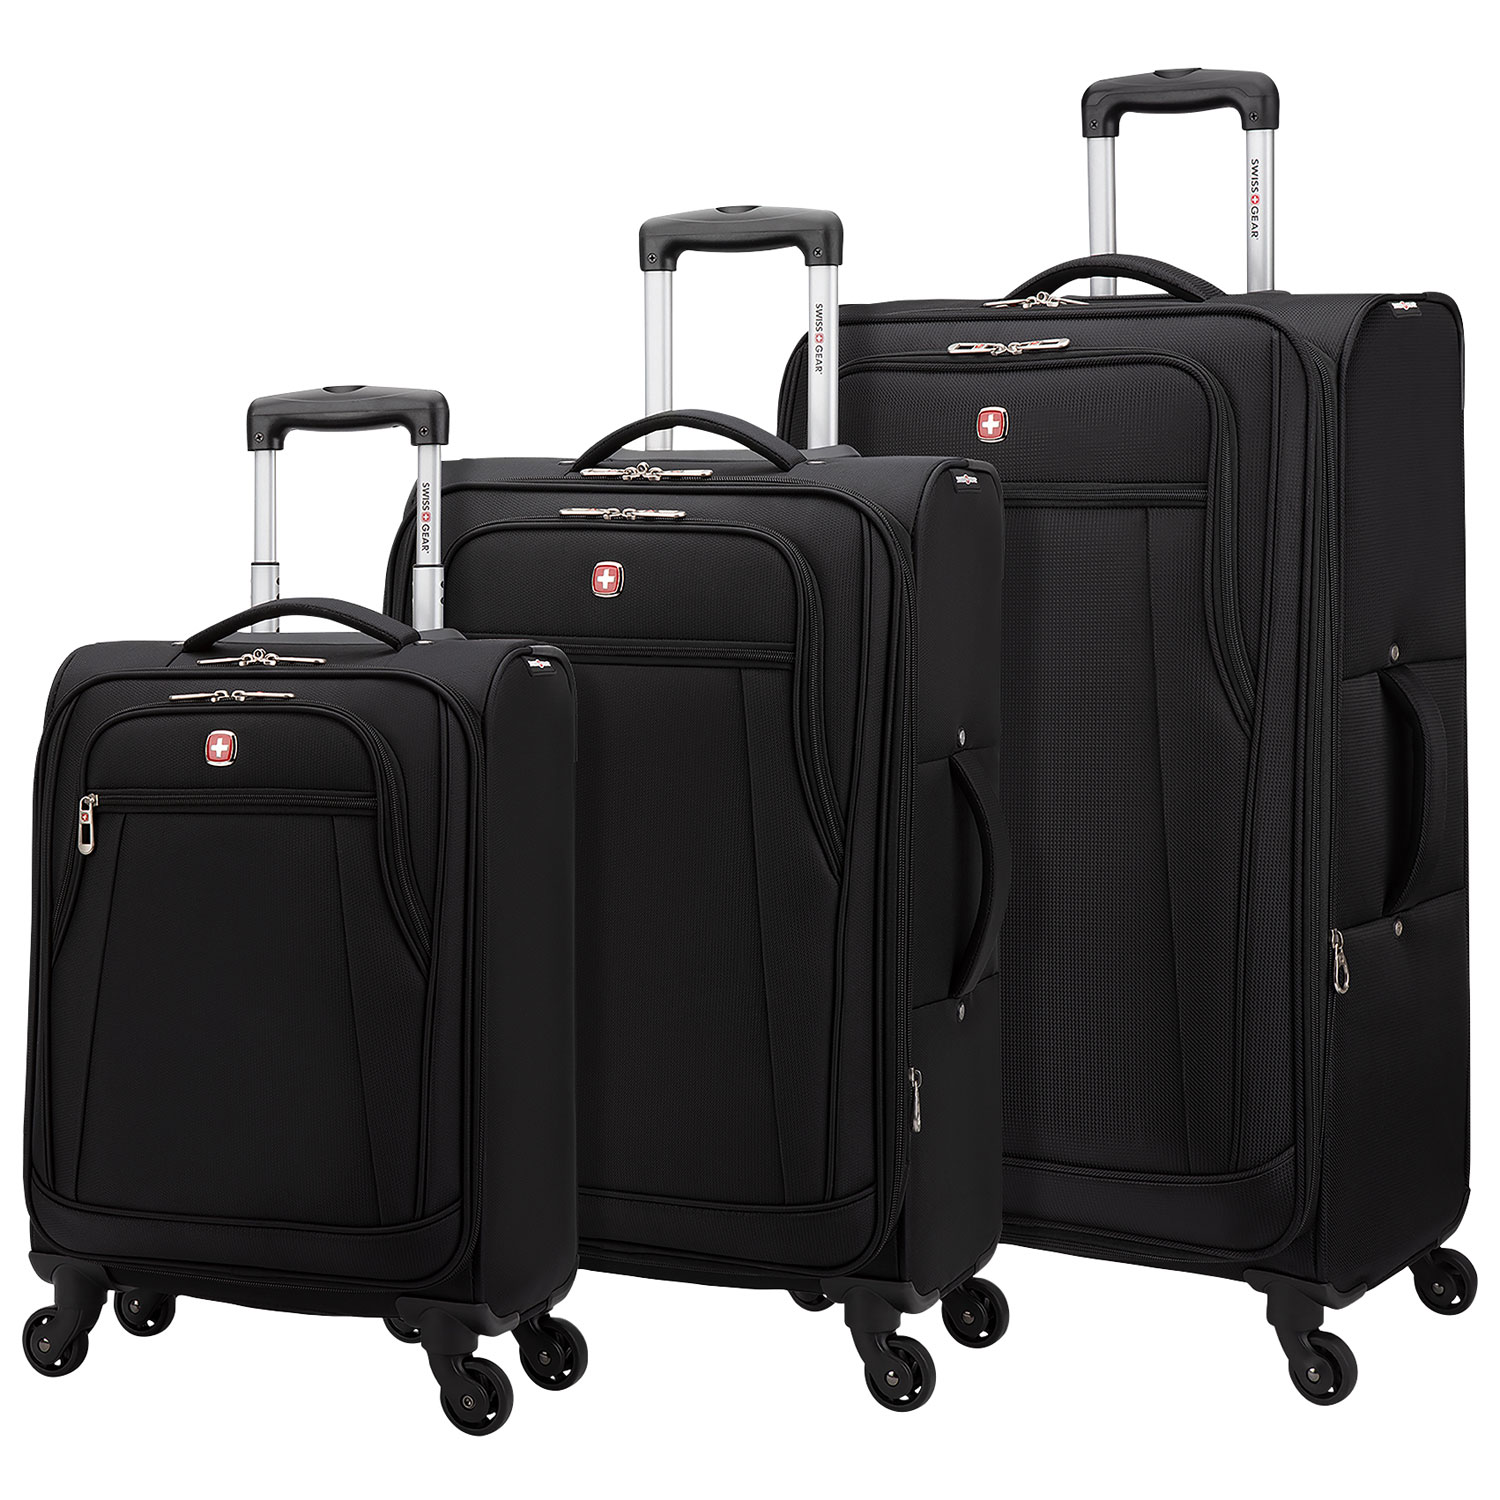 SWISSGEAR Cross Country 3-Piece Soft Side Expandable Luggage Set - Black